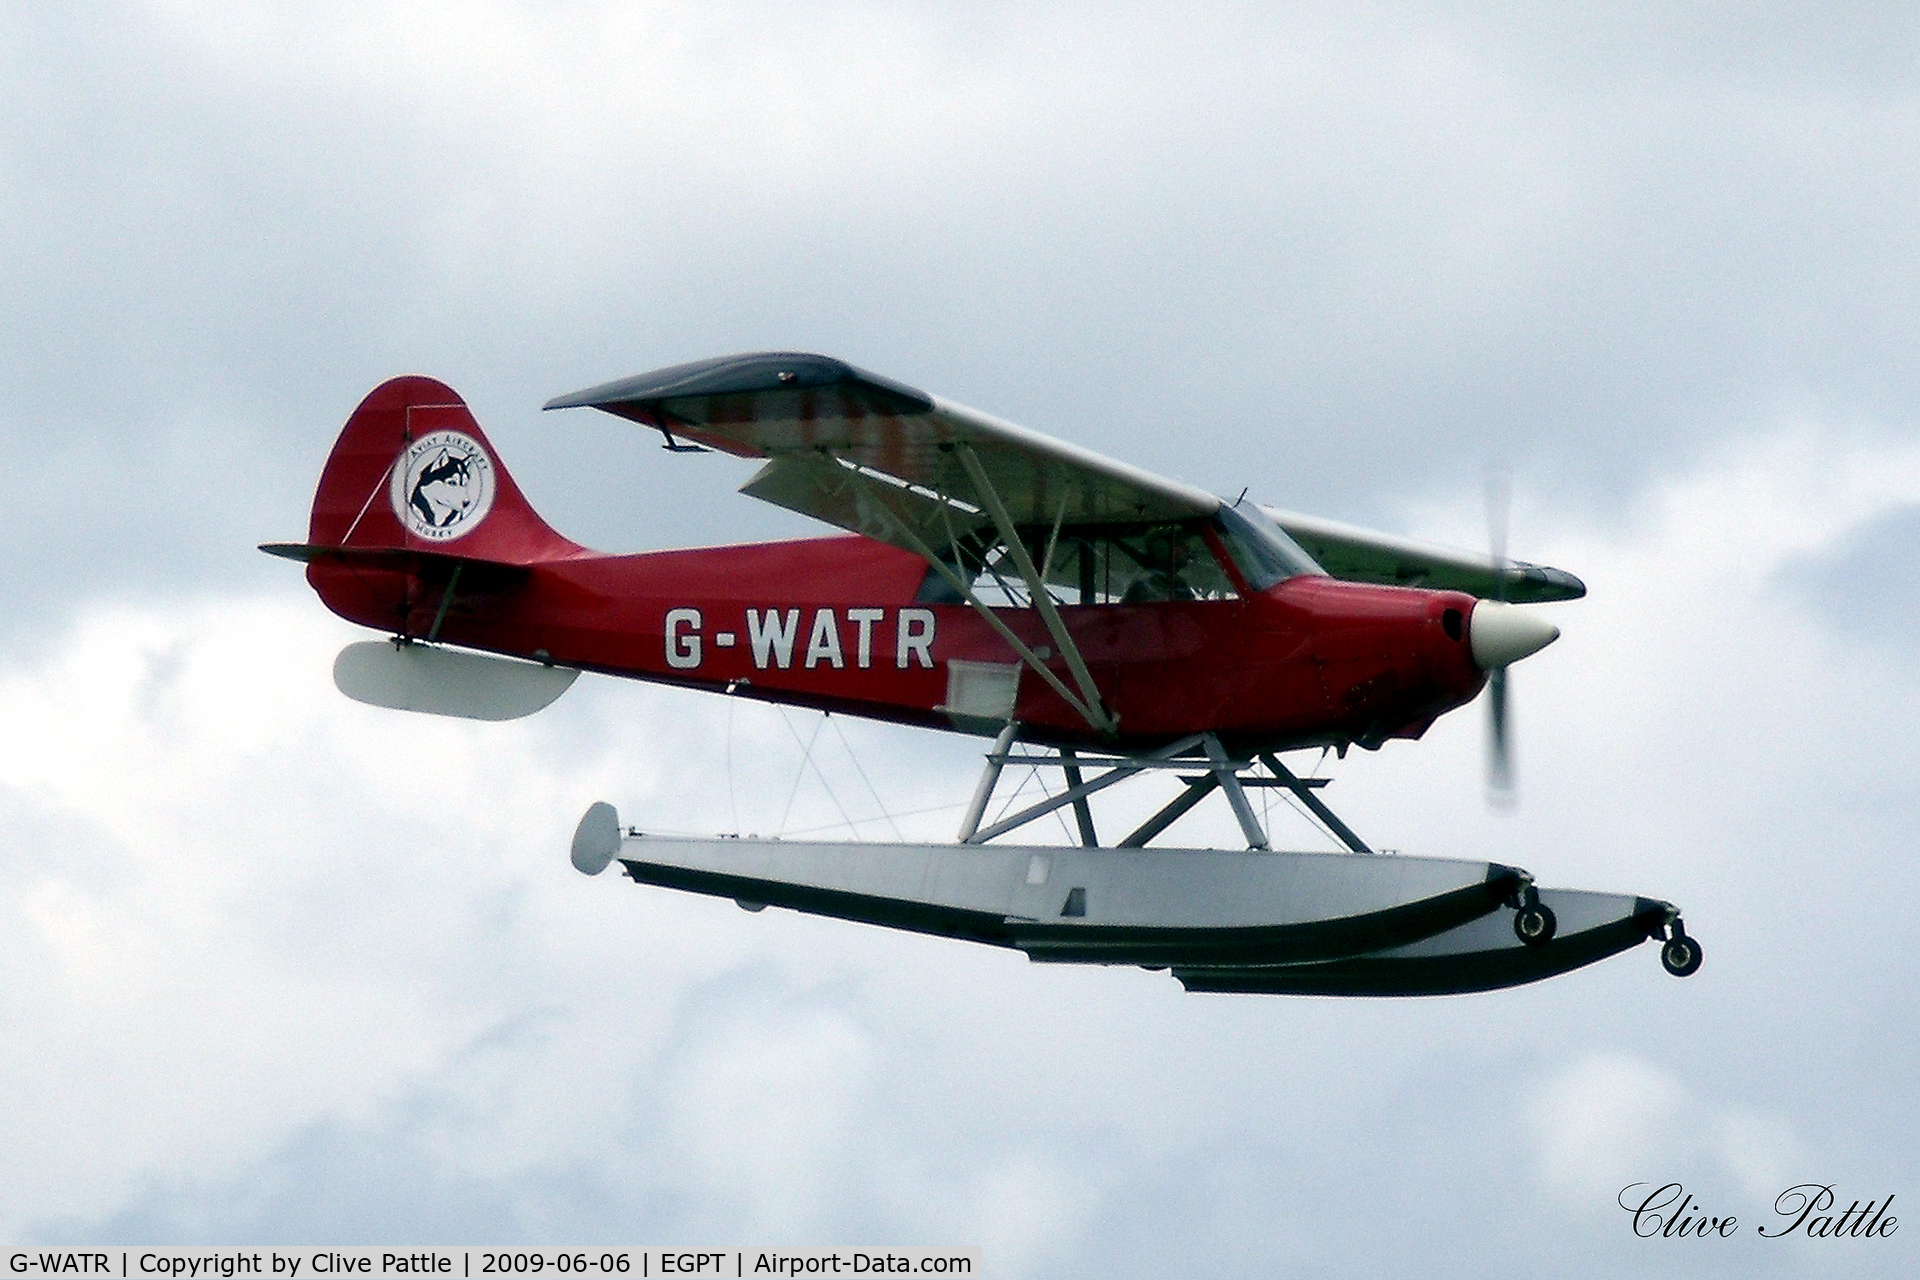 G-WATR, 1988 Christen A-1 Husky C/N 1040, Pictured during its display at the 2009 Perth Airshow held at EGPT